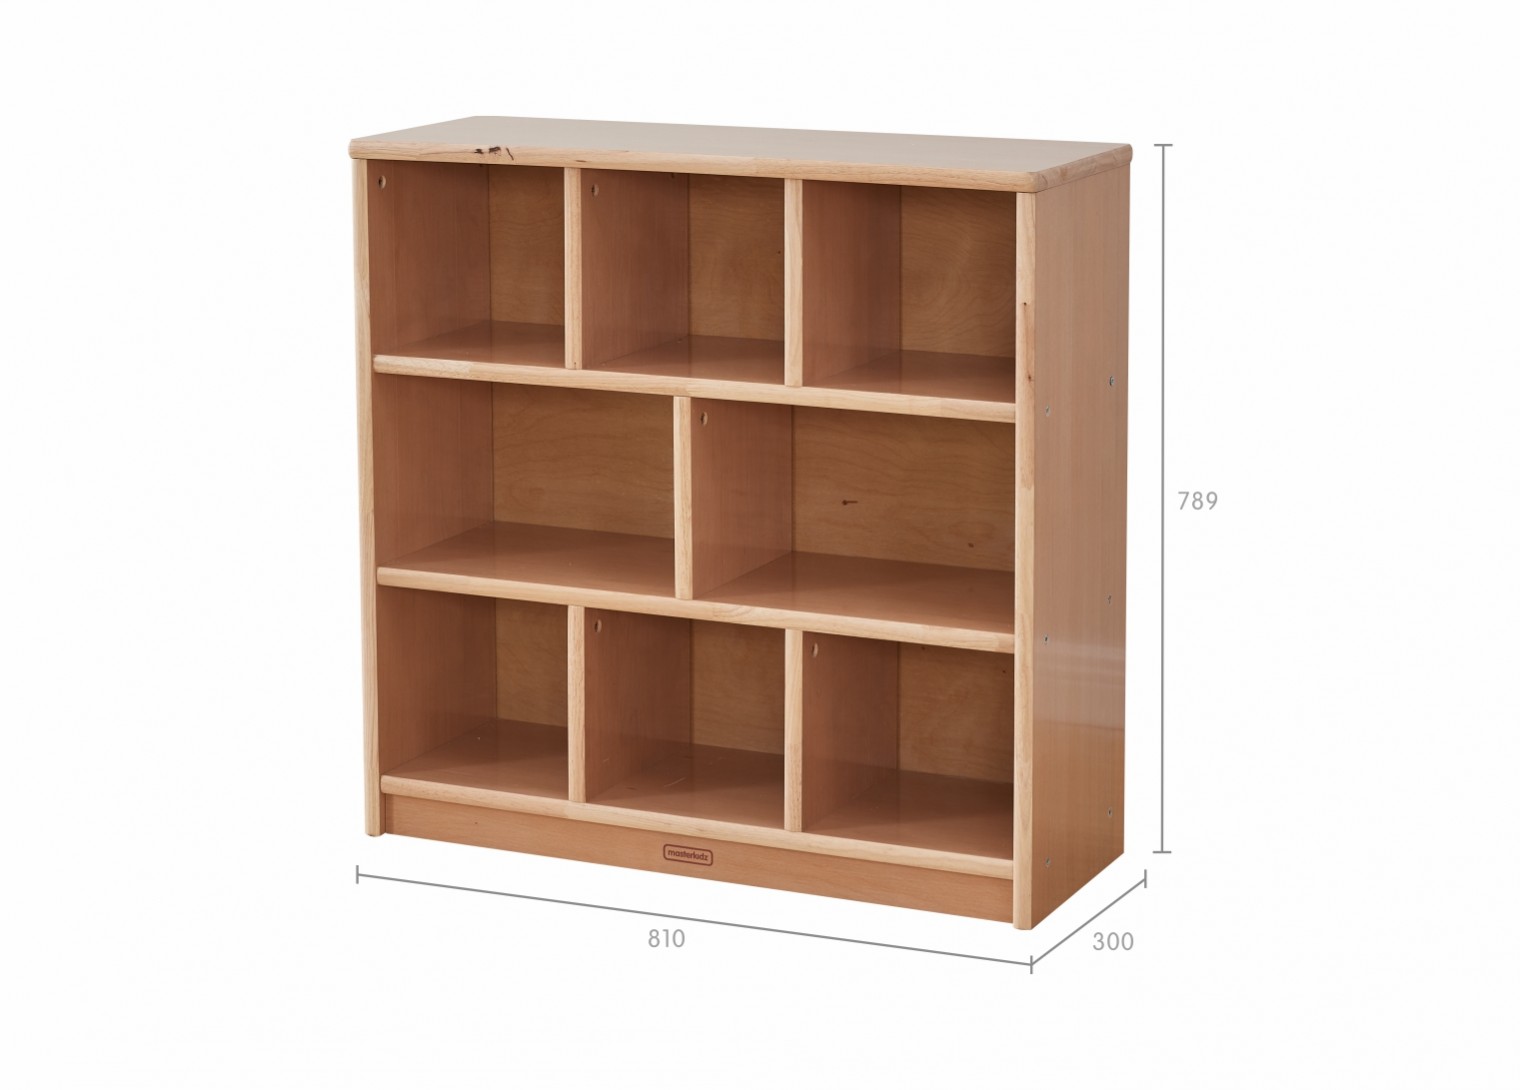 Forest School - 789H x 810L Wooden  8-Compartment Shelving Unit - Wooden Back